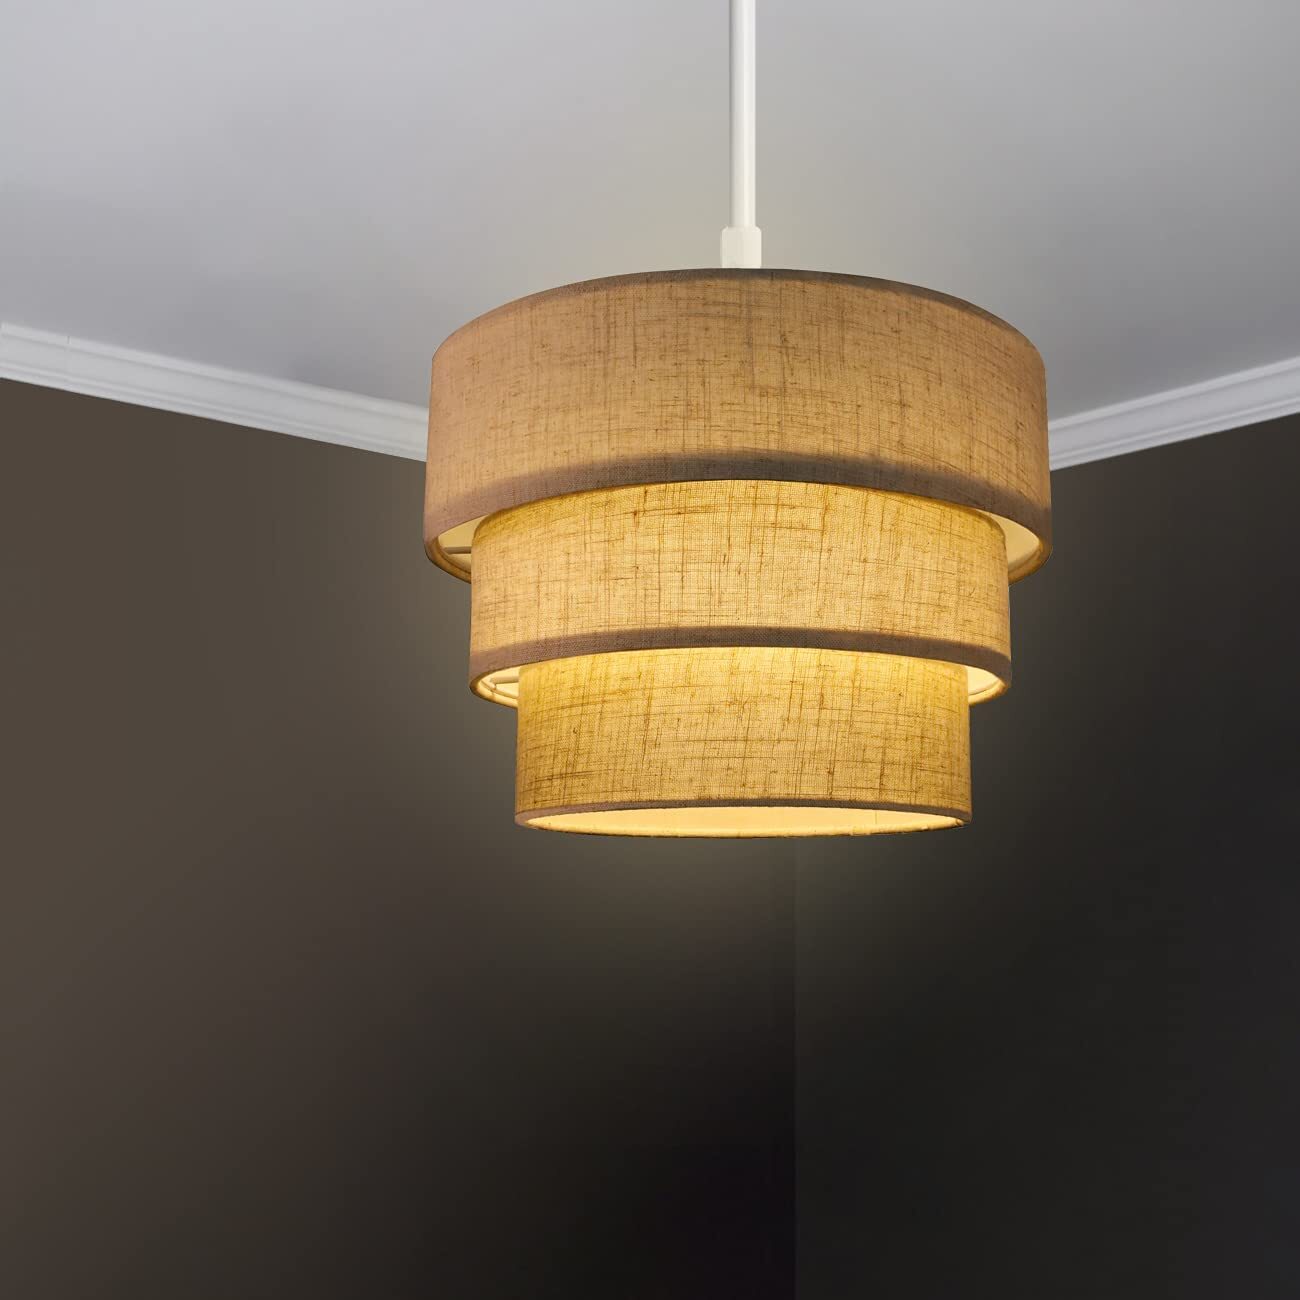 Ceiling/Table Light ShadesModern Drum-Shaped Lampshades in Decorative Colors